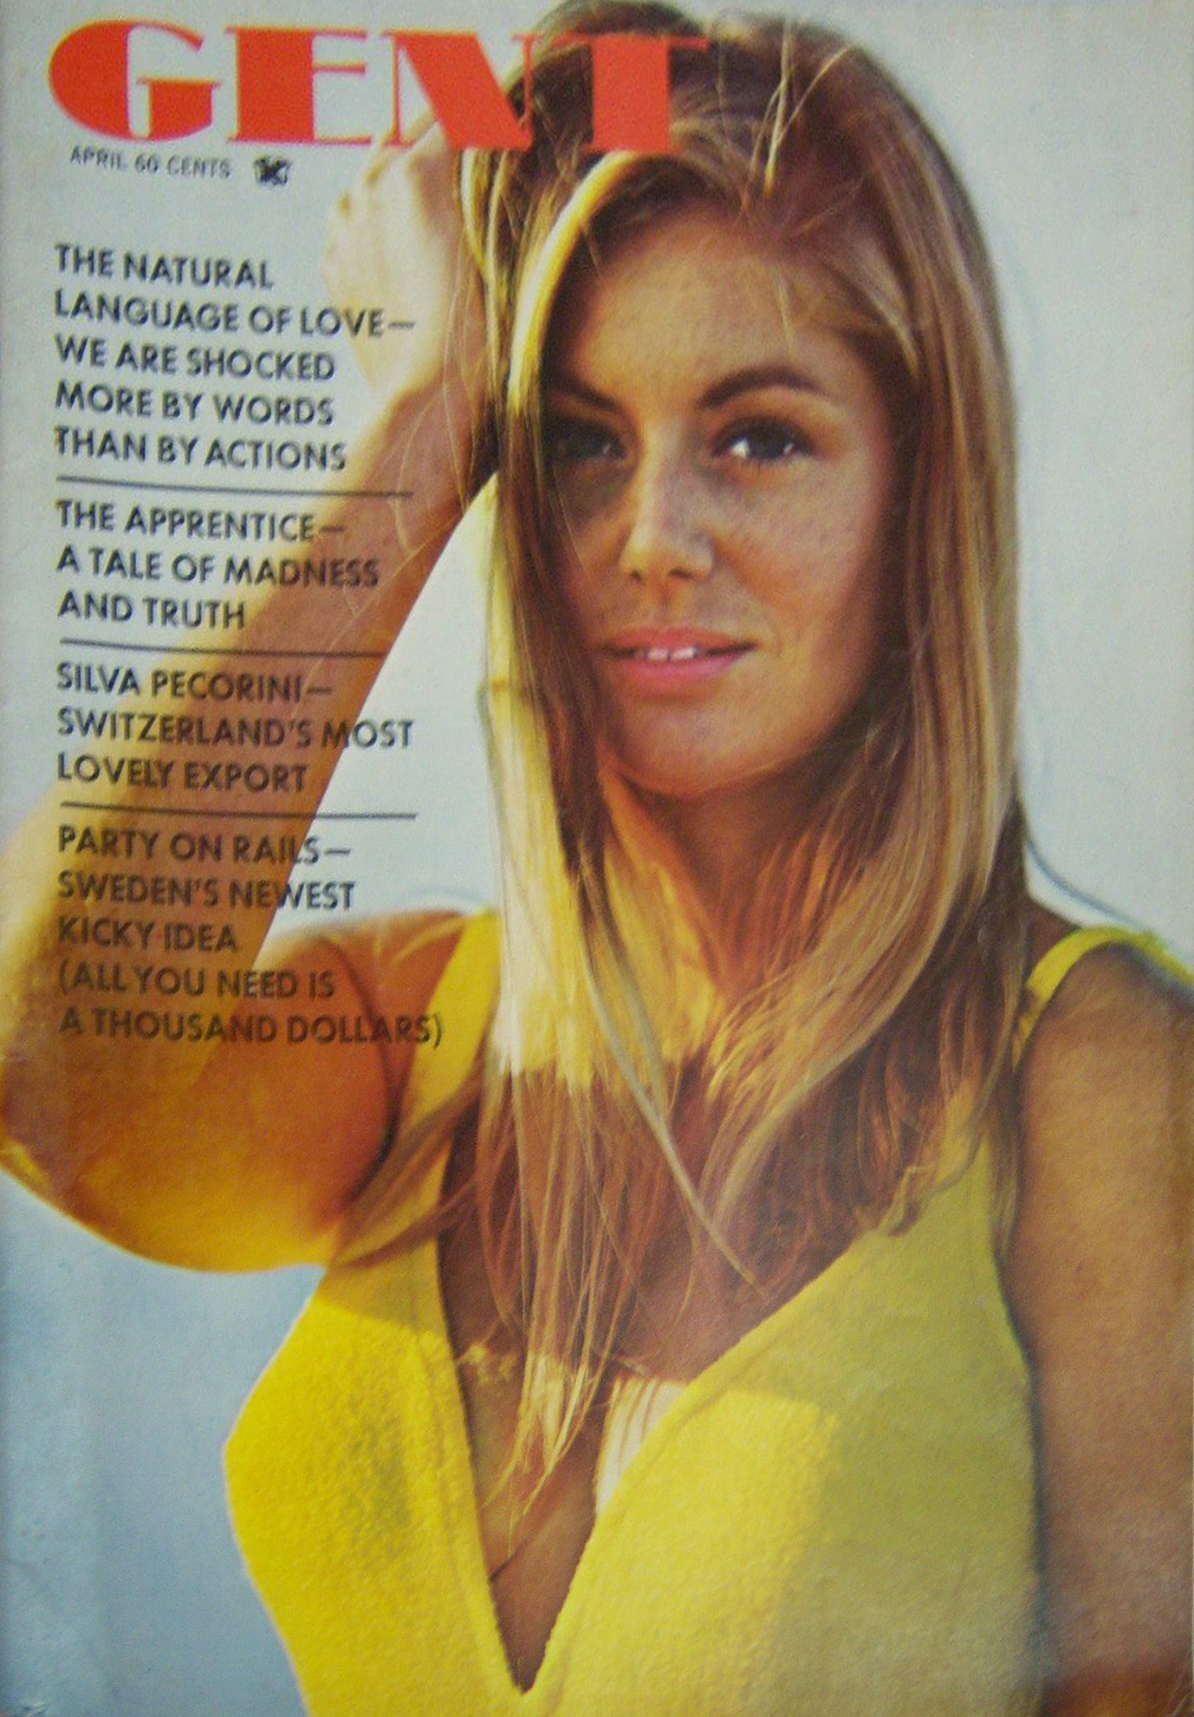 Gent April 1968 magazine back issue Gent magizine back copy Gent April 1968 Adult Vintage Magazine Back Issue Featuring Large Breasted Nude Women. The Natural Language Of Love We Are Shocked More By Words Than By Actions.